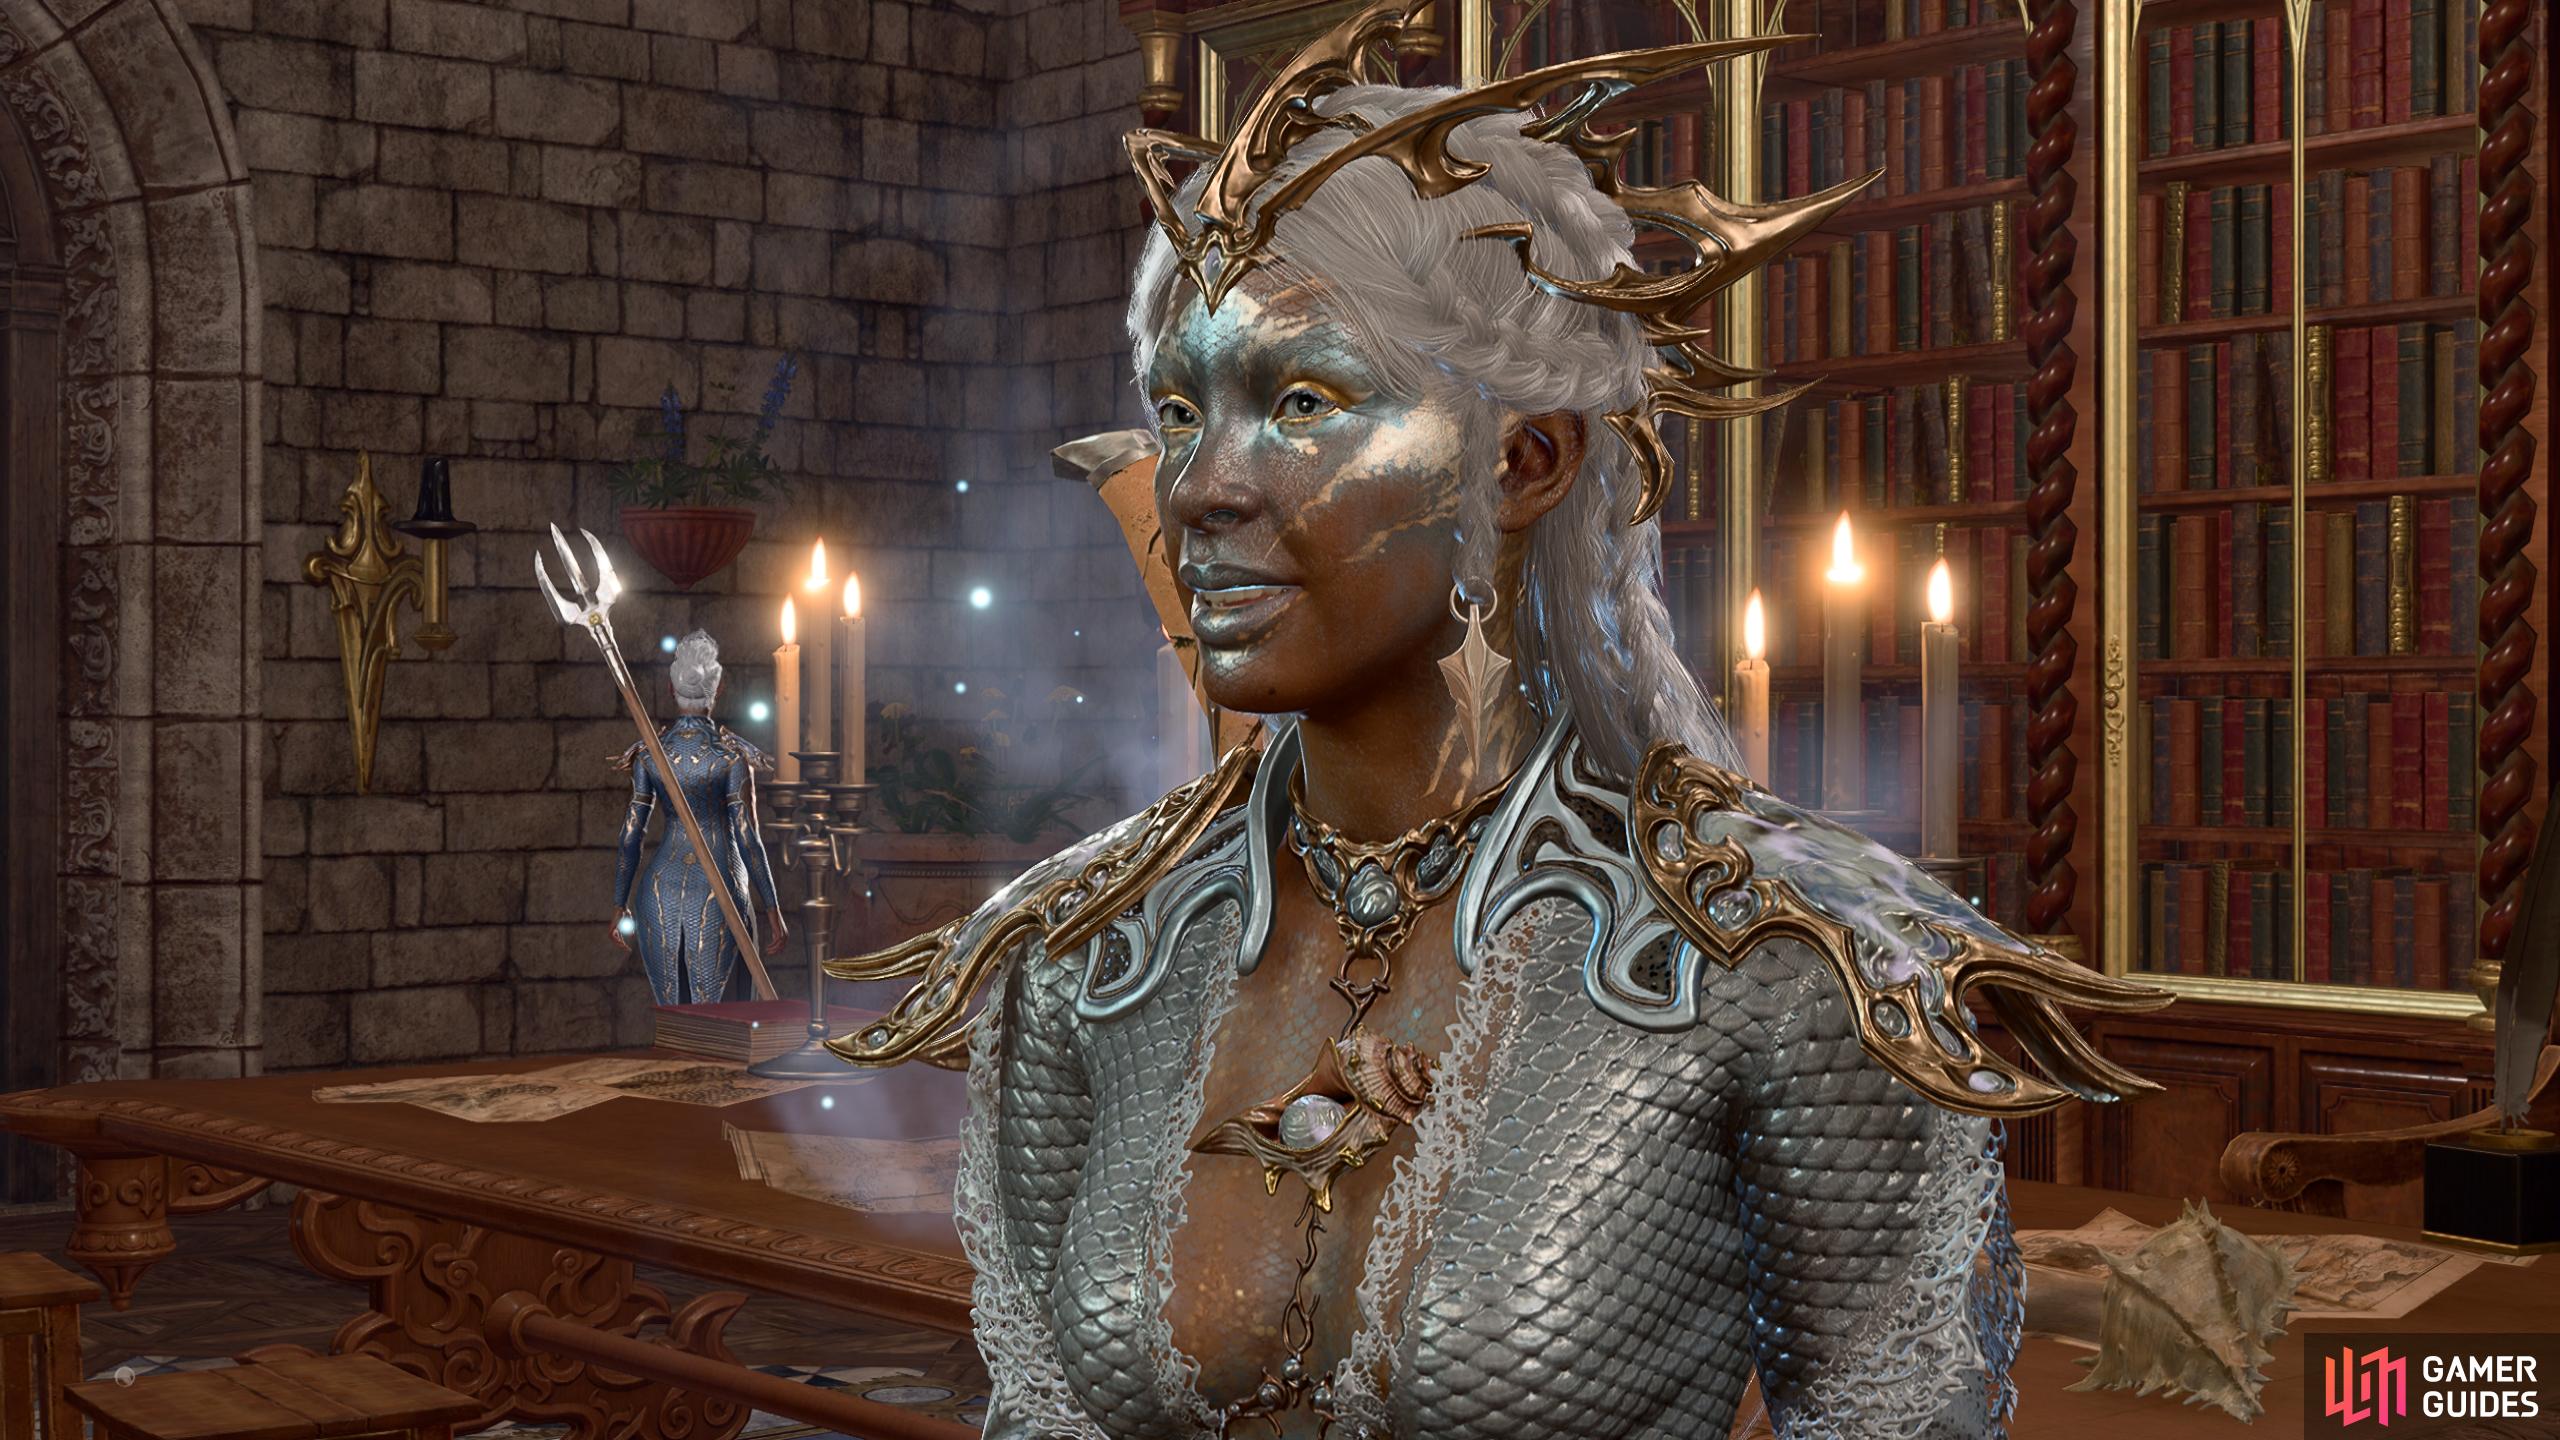 Speak to Allandra Grey in the Water Queen’s House to start the Avenge the Drowned quest.